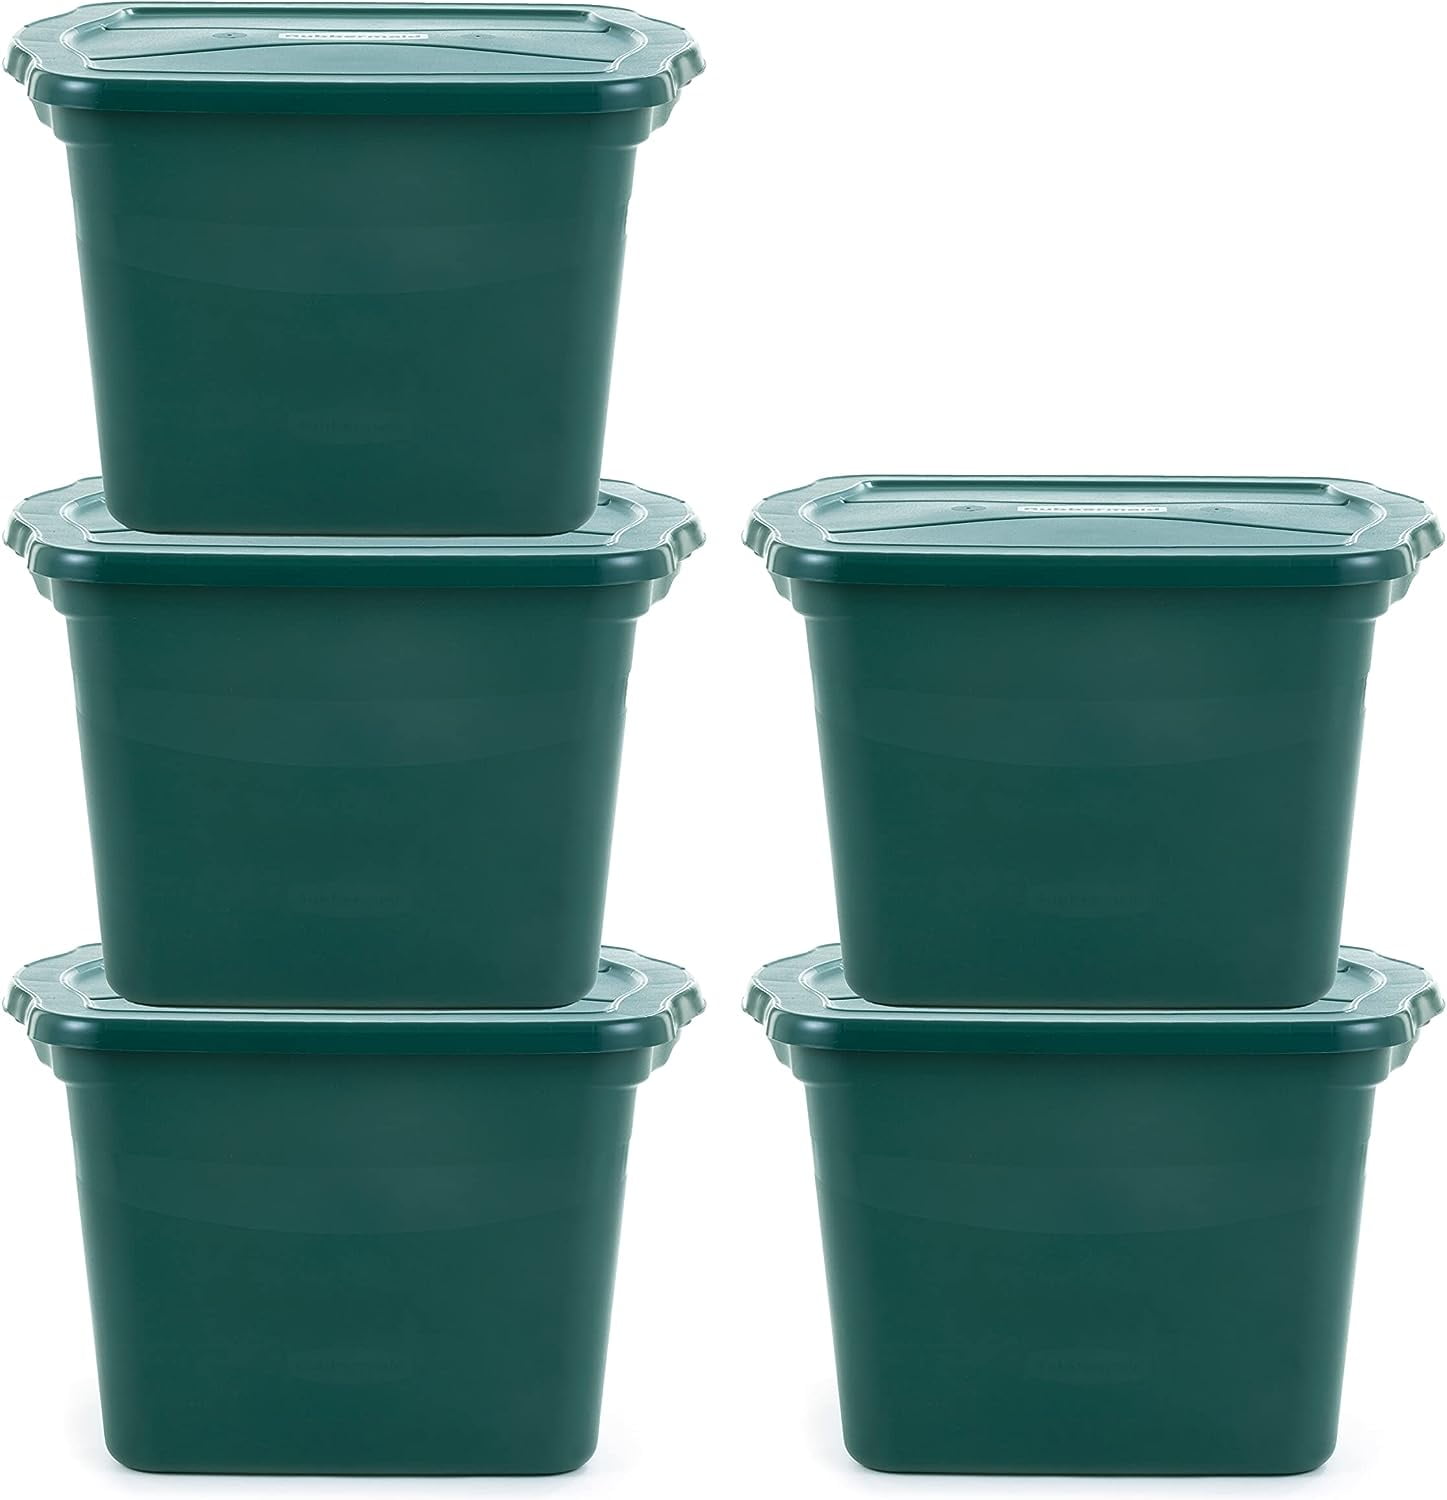 Rubbermaid ECOSense Storage Containers with Lids, 29 Gal Pack of 5, Durable  and Reusable Stackable Storage Bins for Garage or Home Organization, Made  From Recycled Materials 